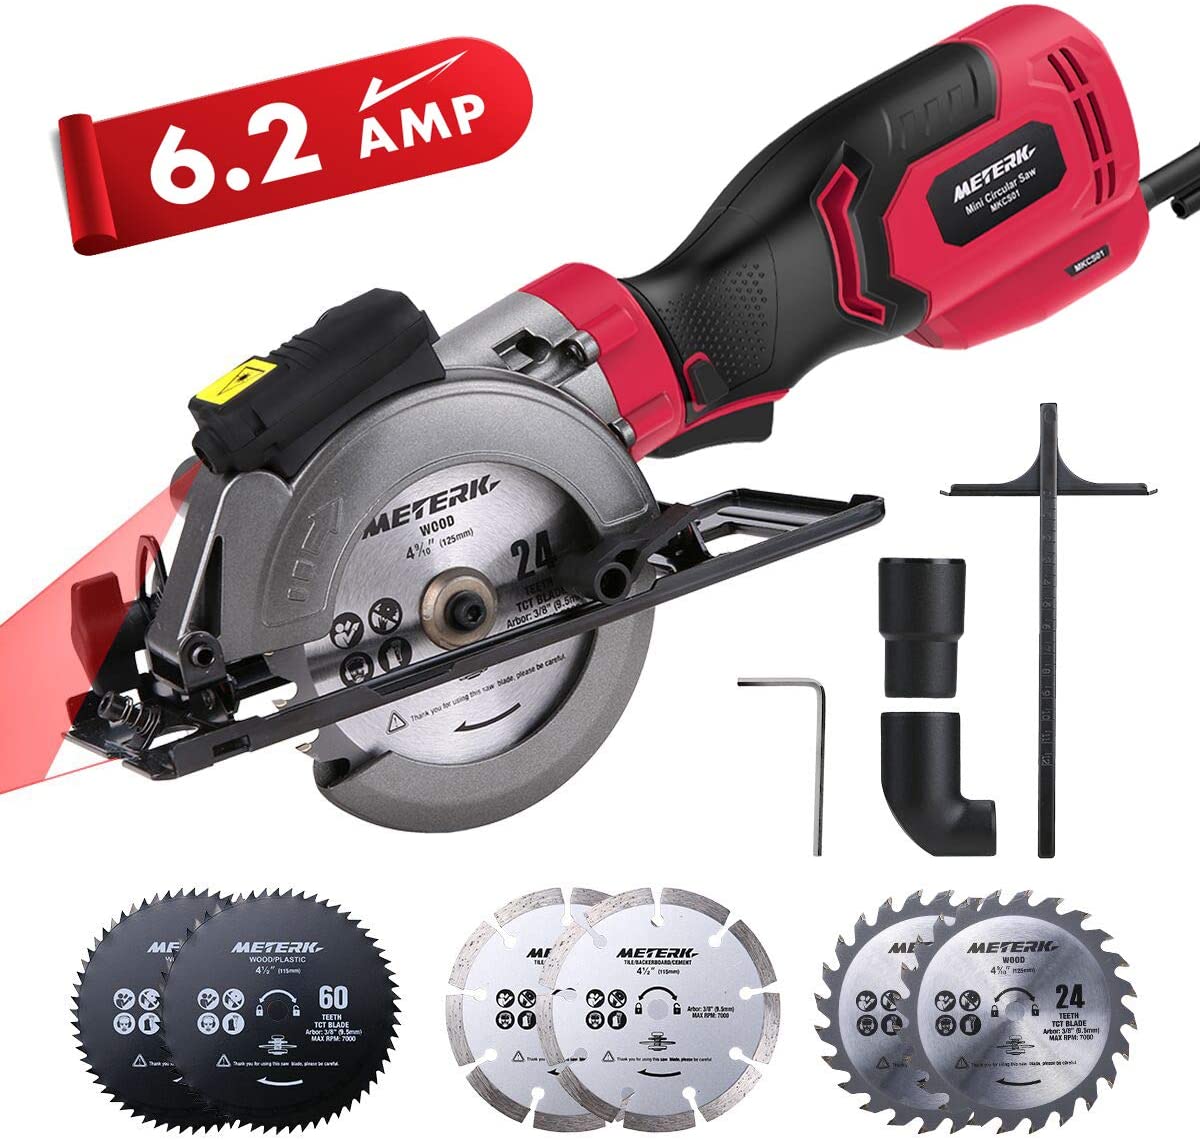 Meterk Mini Circular Saw, 6.2A Compact Electric Circular Saw with Laser Guide, 6 Blades, Max Cutting Depth 1-9/10''(90°), 1-1/4''(0°-45°) - image 1 of 6